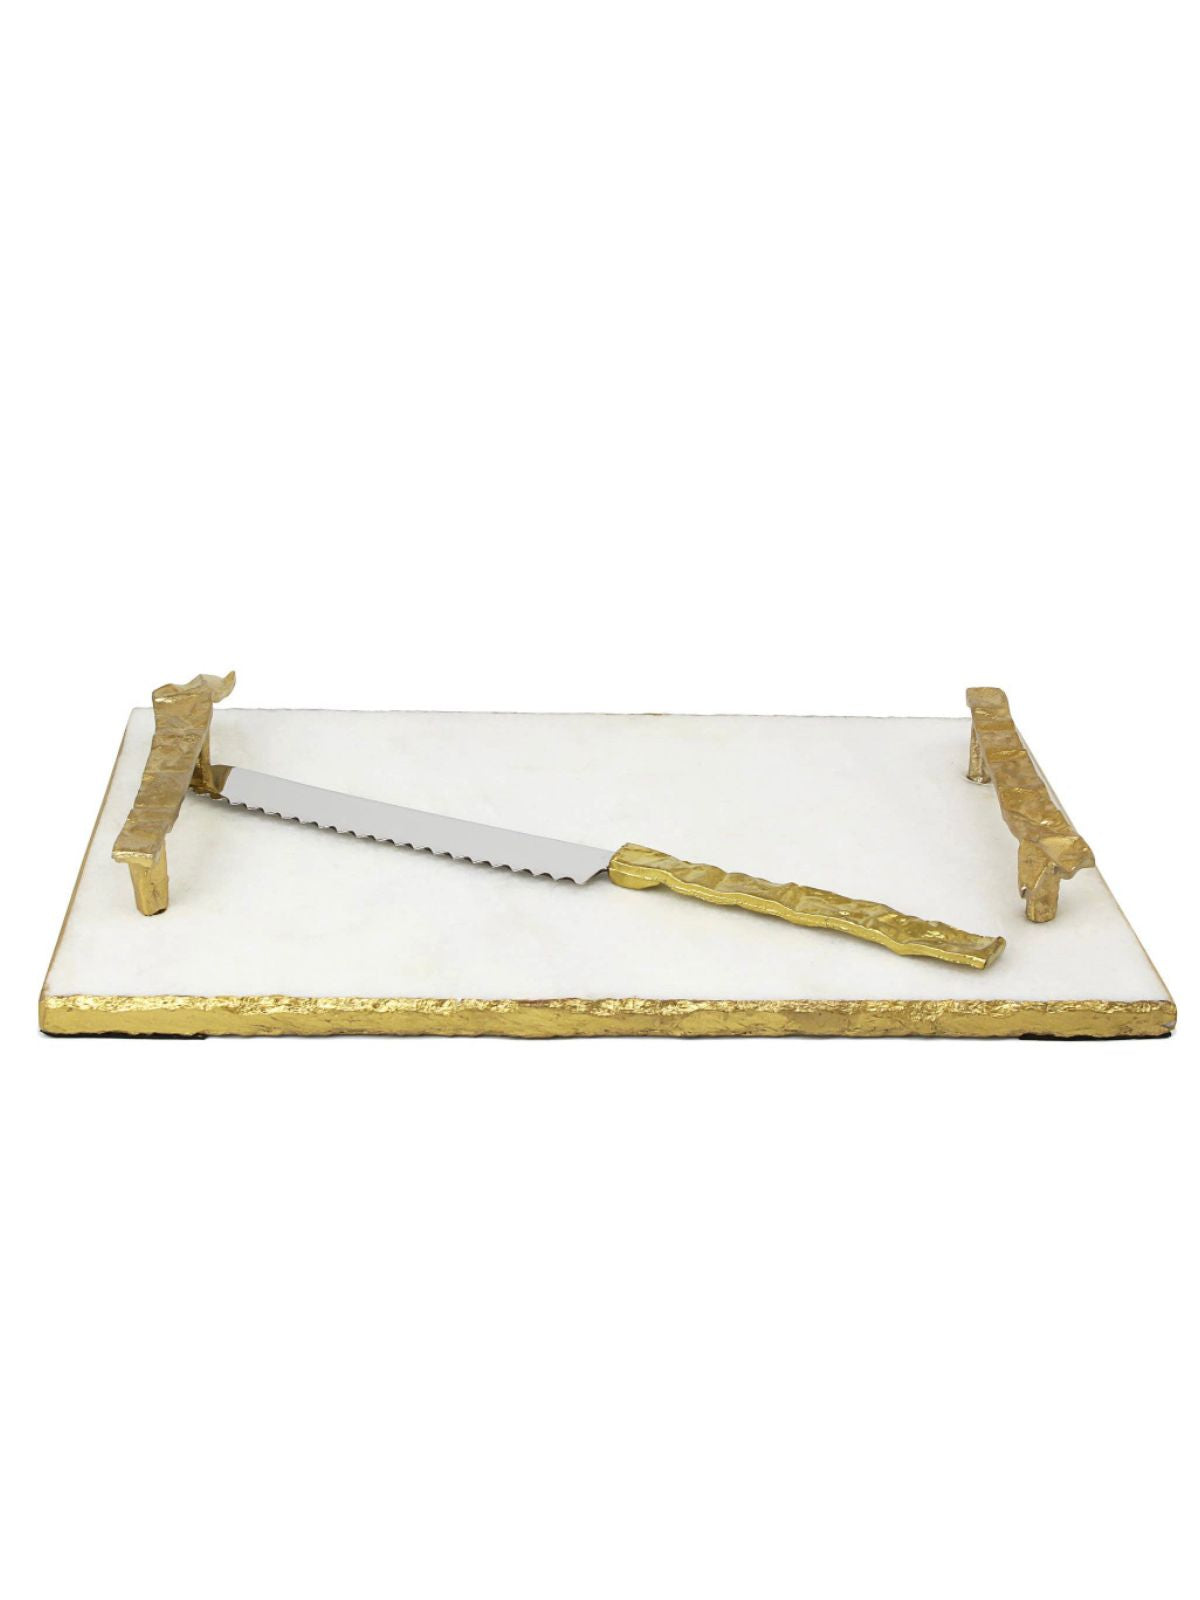 White Marble Tray with Gold Textured Handles and Gold Handle Knife, 15w x 10L.